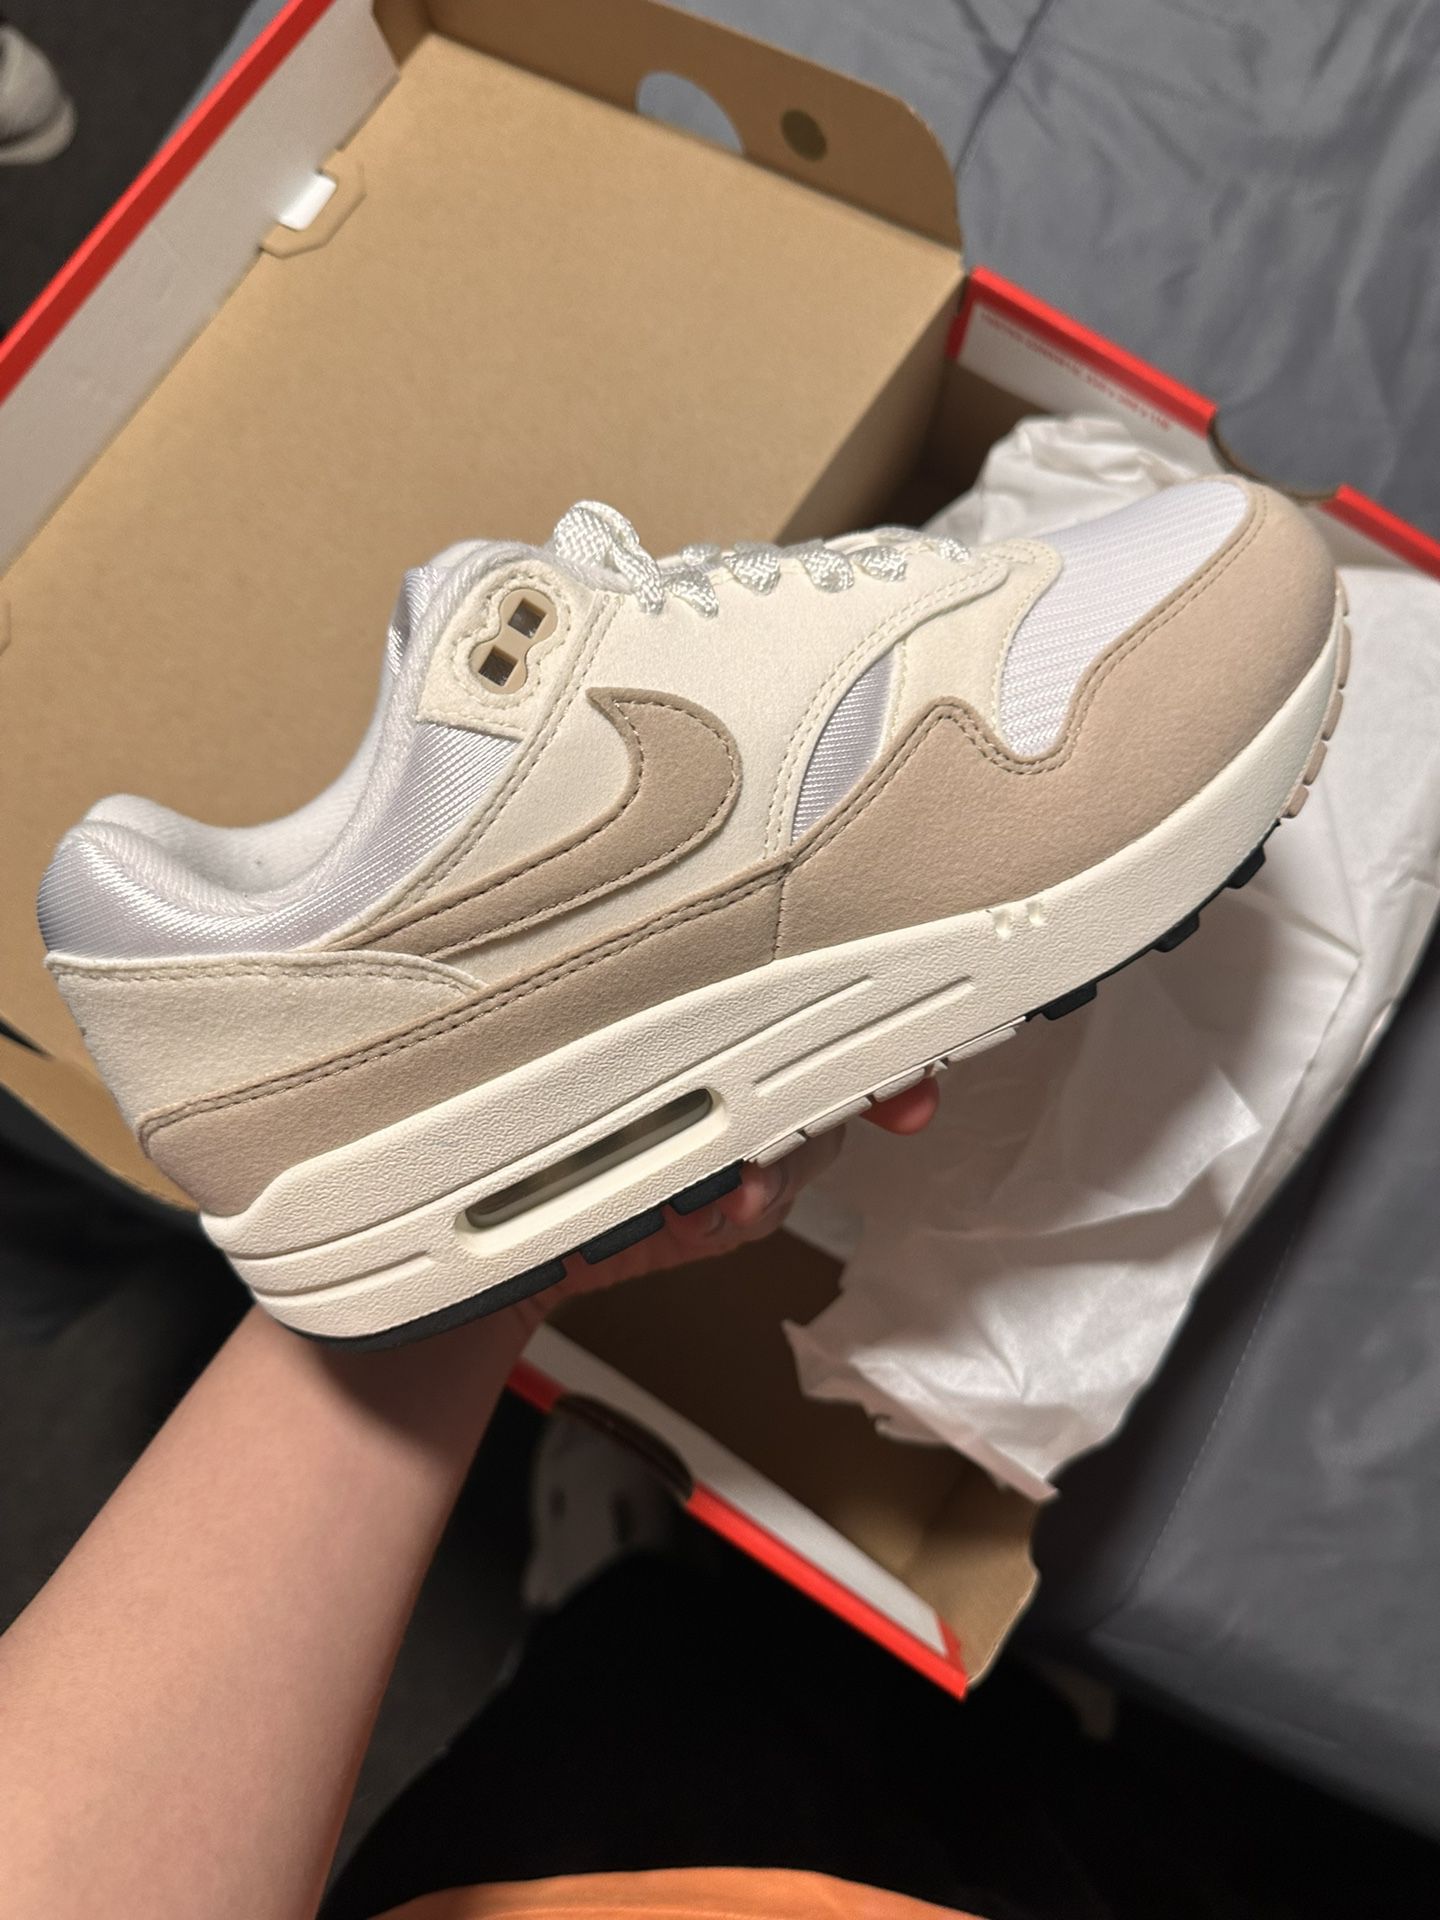 Brand New Wmns Size 7 Nike Air Max 1